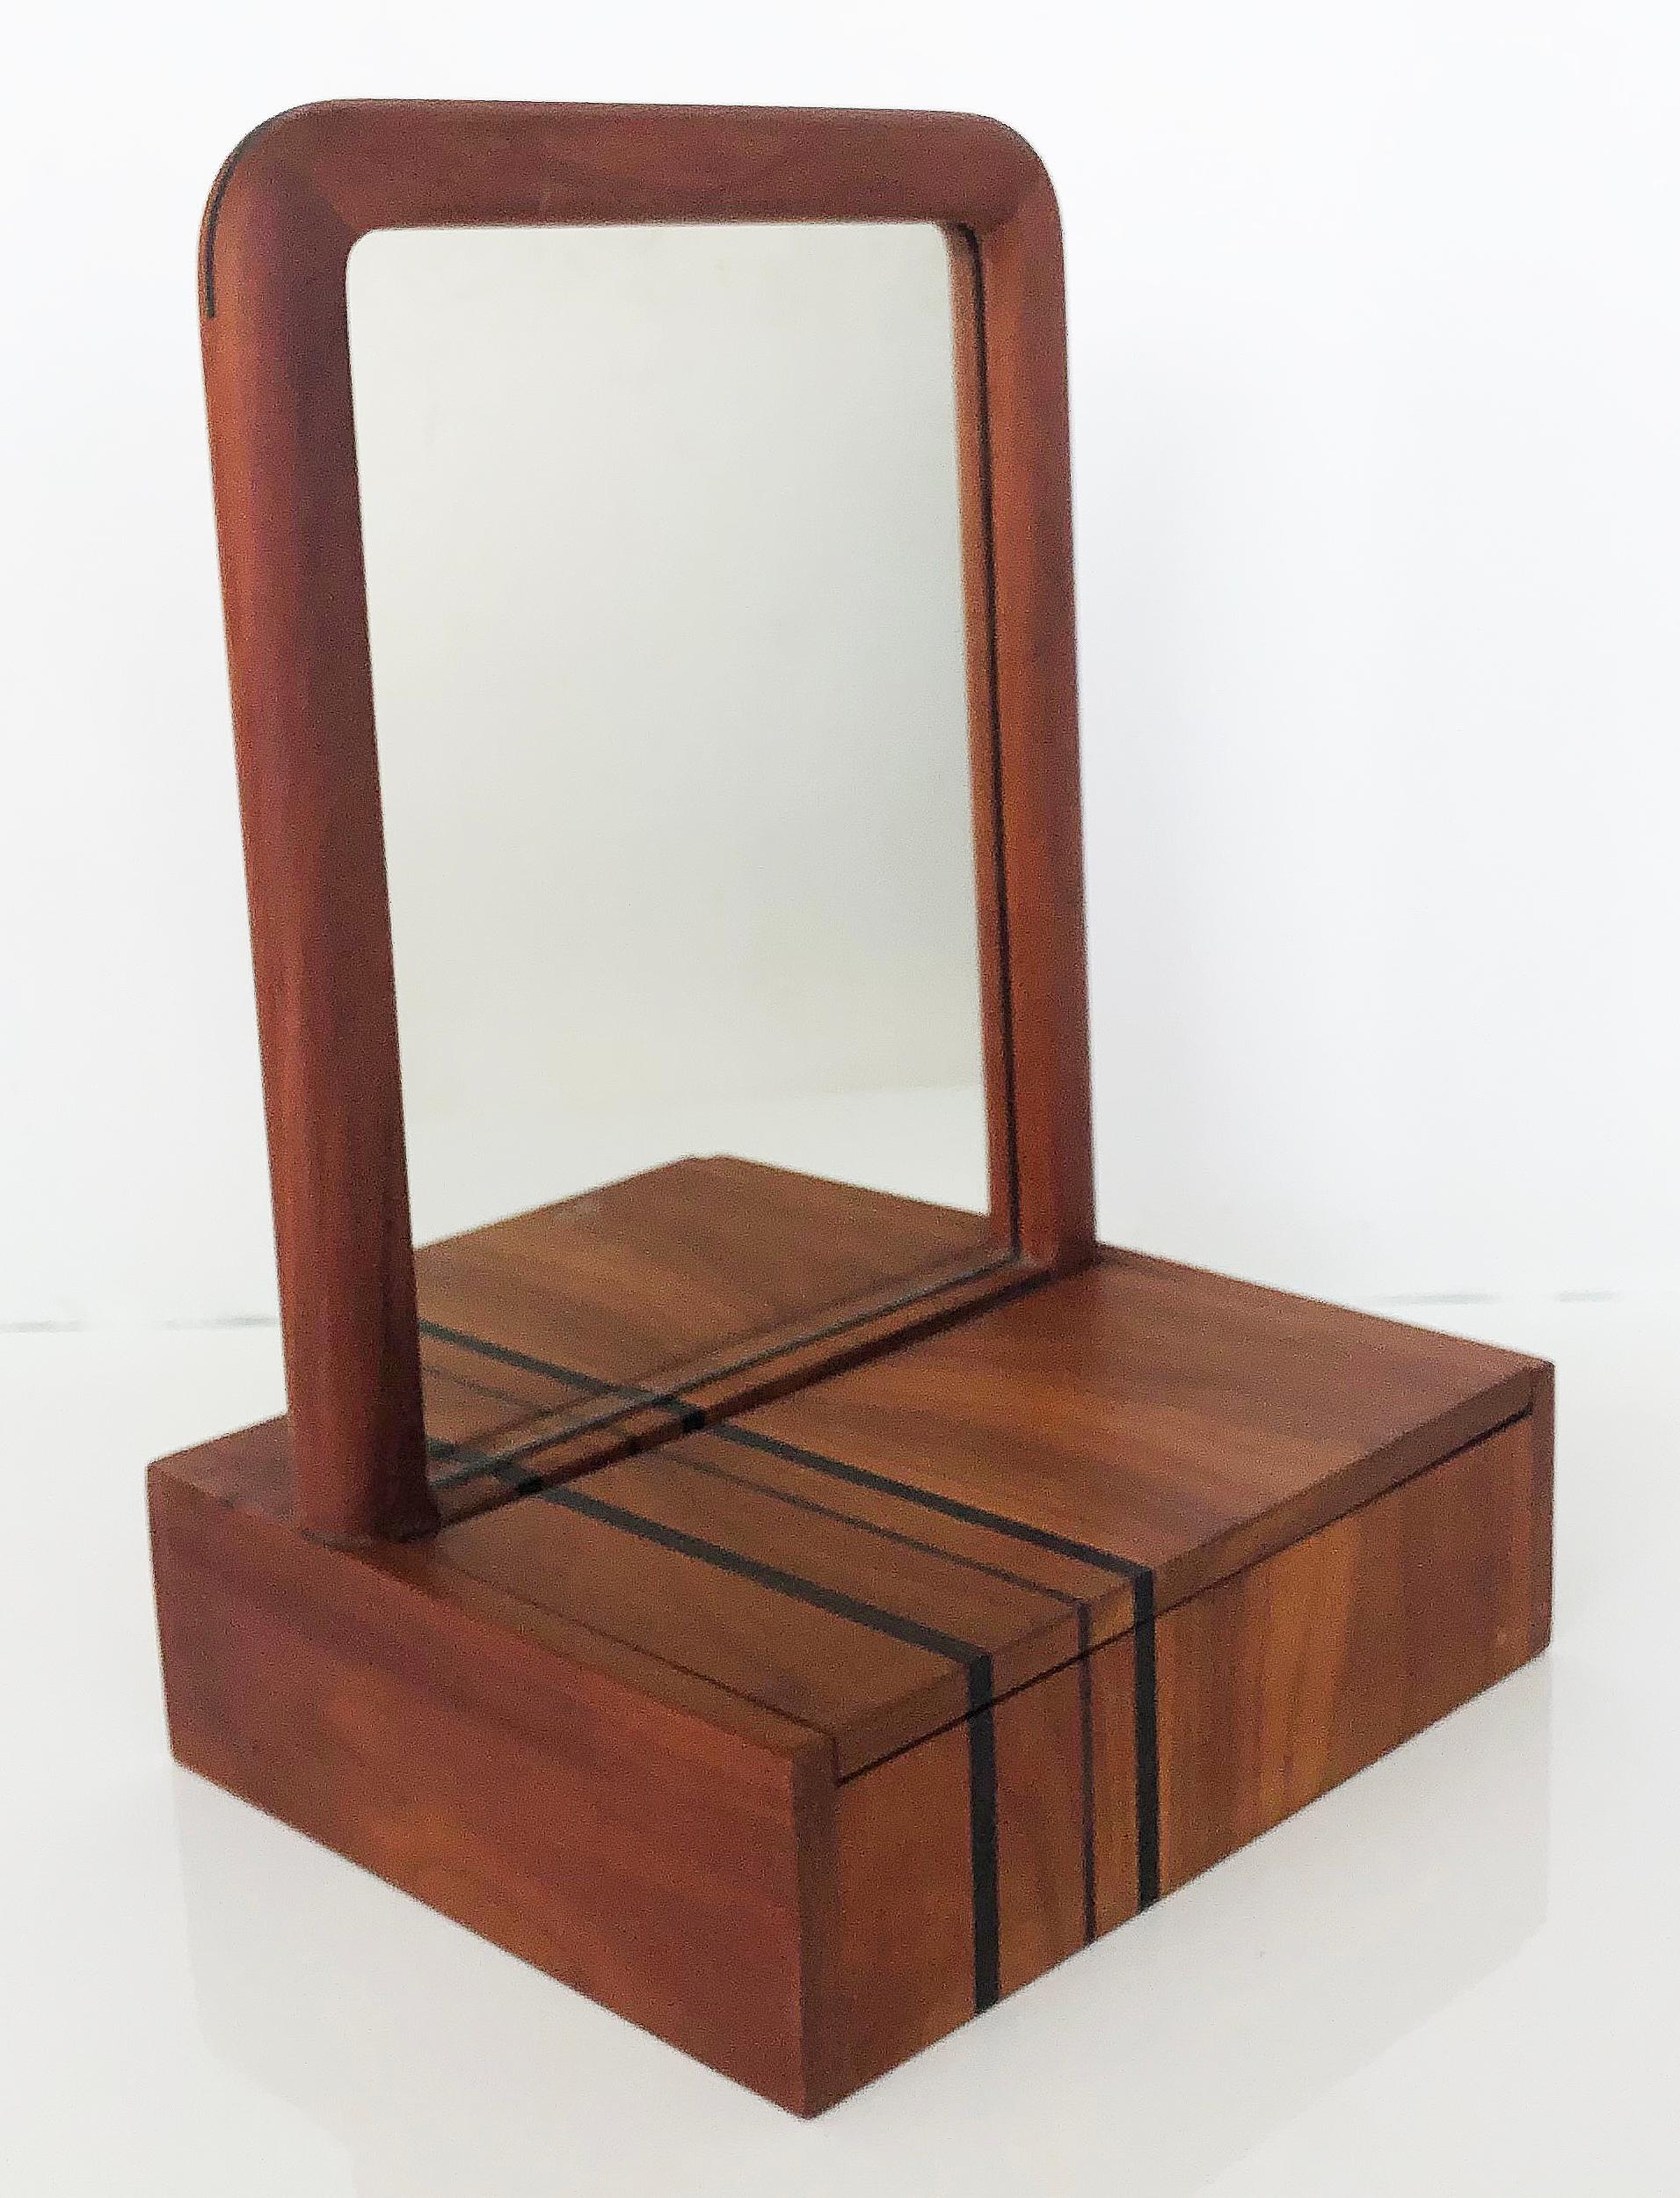 American studio craftsman dressing mirror with stand.

Offered for sale is an American Studio Craftsman's Dressing mirror with drawer on stand.